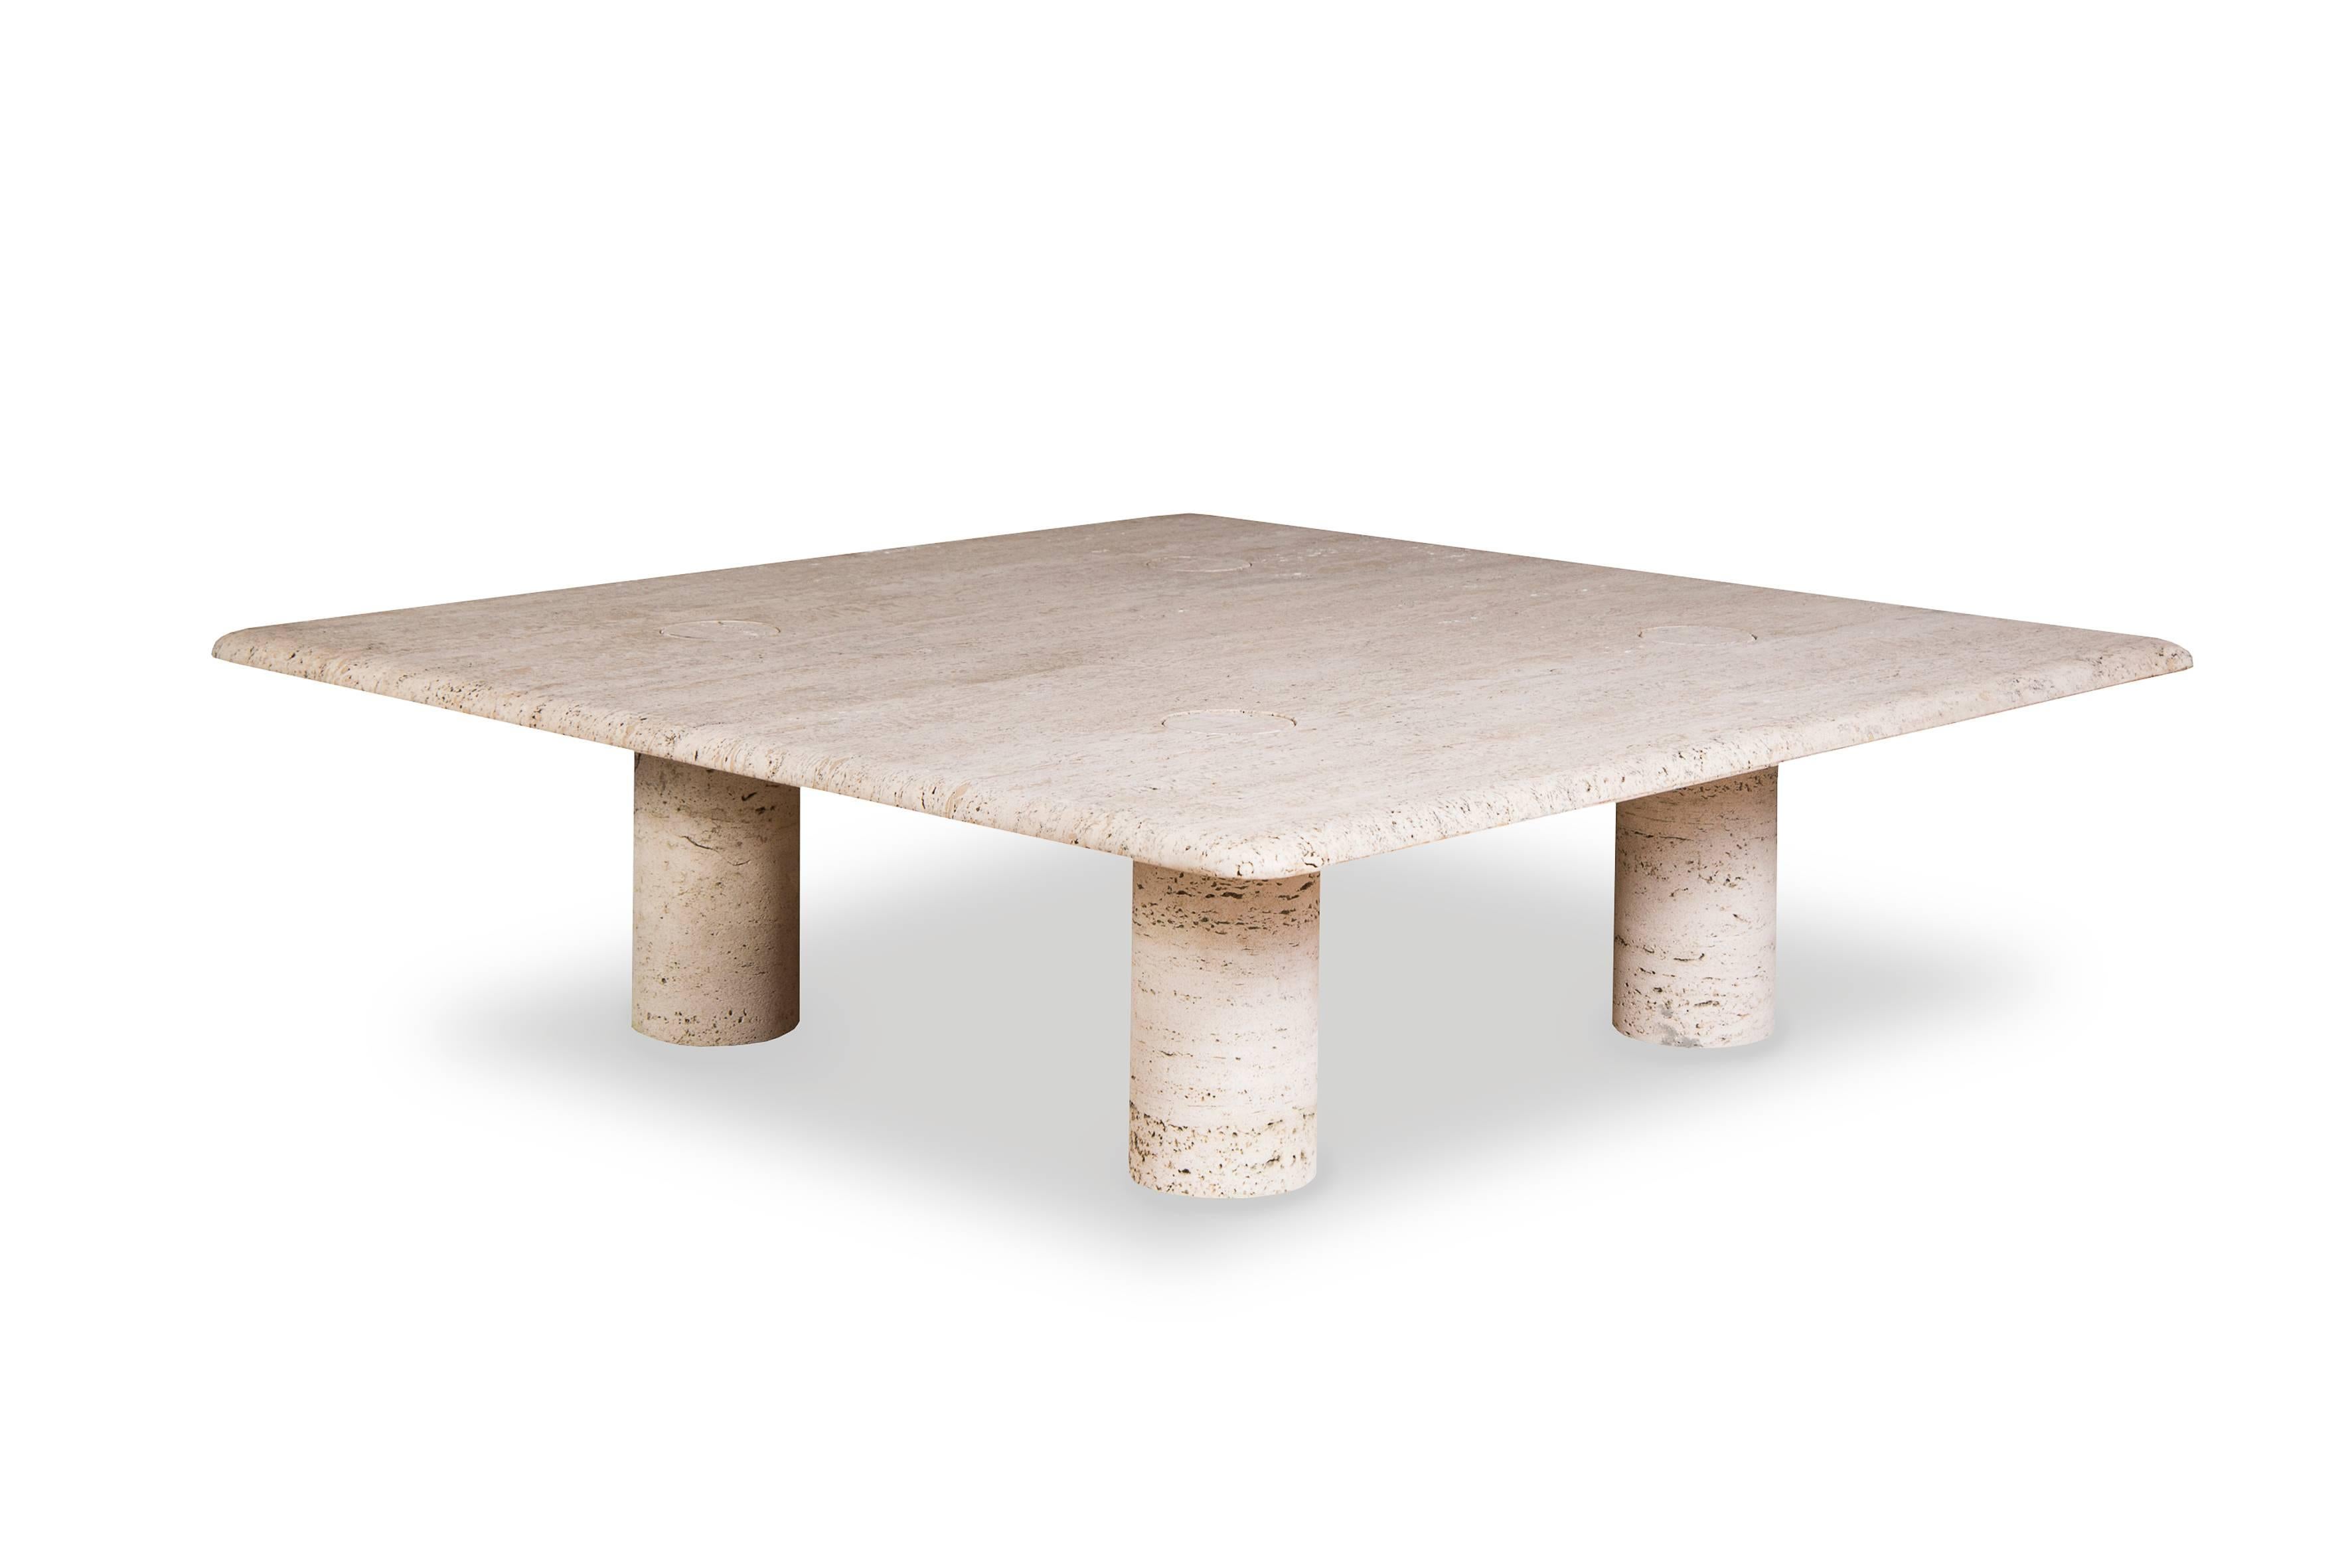 A travertine coffee table.

The legs and the top interlock.

Designer : Angelo Mangiarotti
Editor : Up and Up

Italy, circa 1970.

